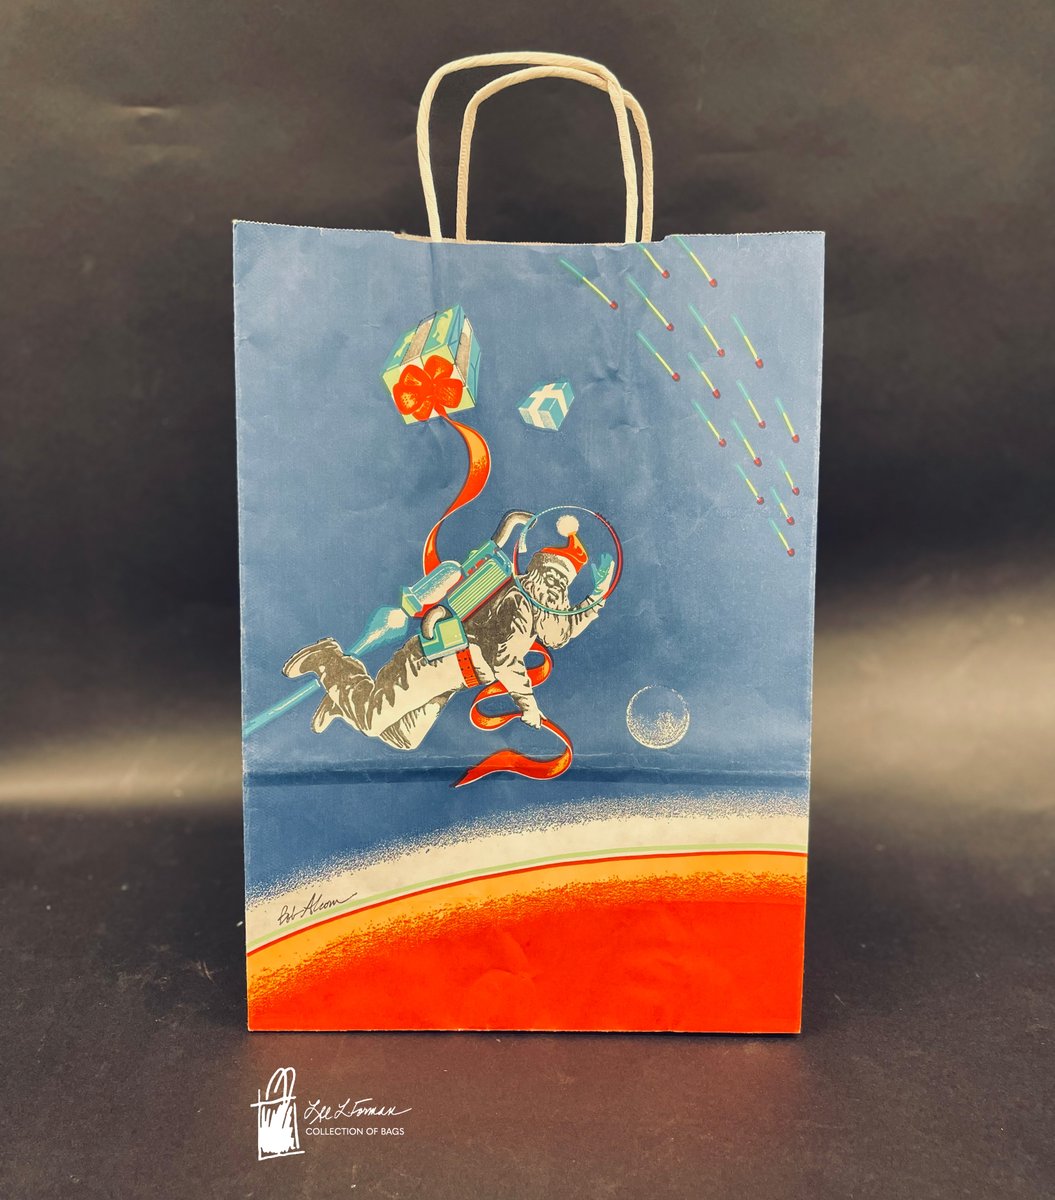 358/365: This 1979 bag from Bloomingdales 'Christmas at the Dawn of a Decade' campaign features Santa Claus delivering gifts while wearing a jet pack in space. The design is signed by Bob Alcorn.